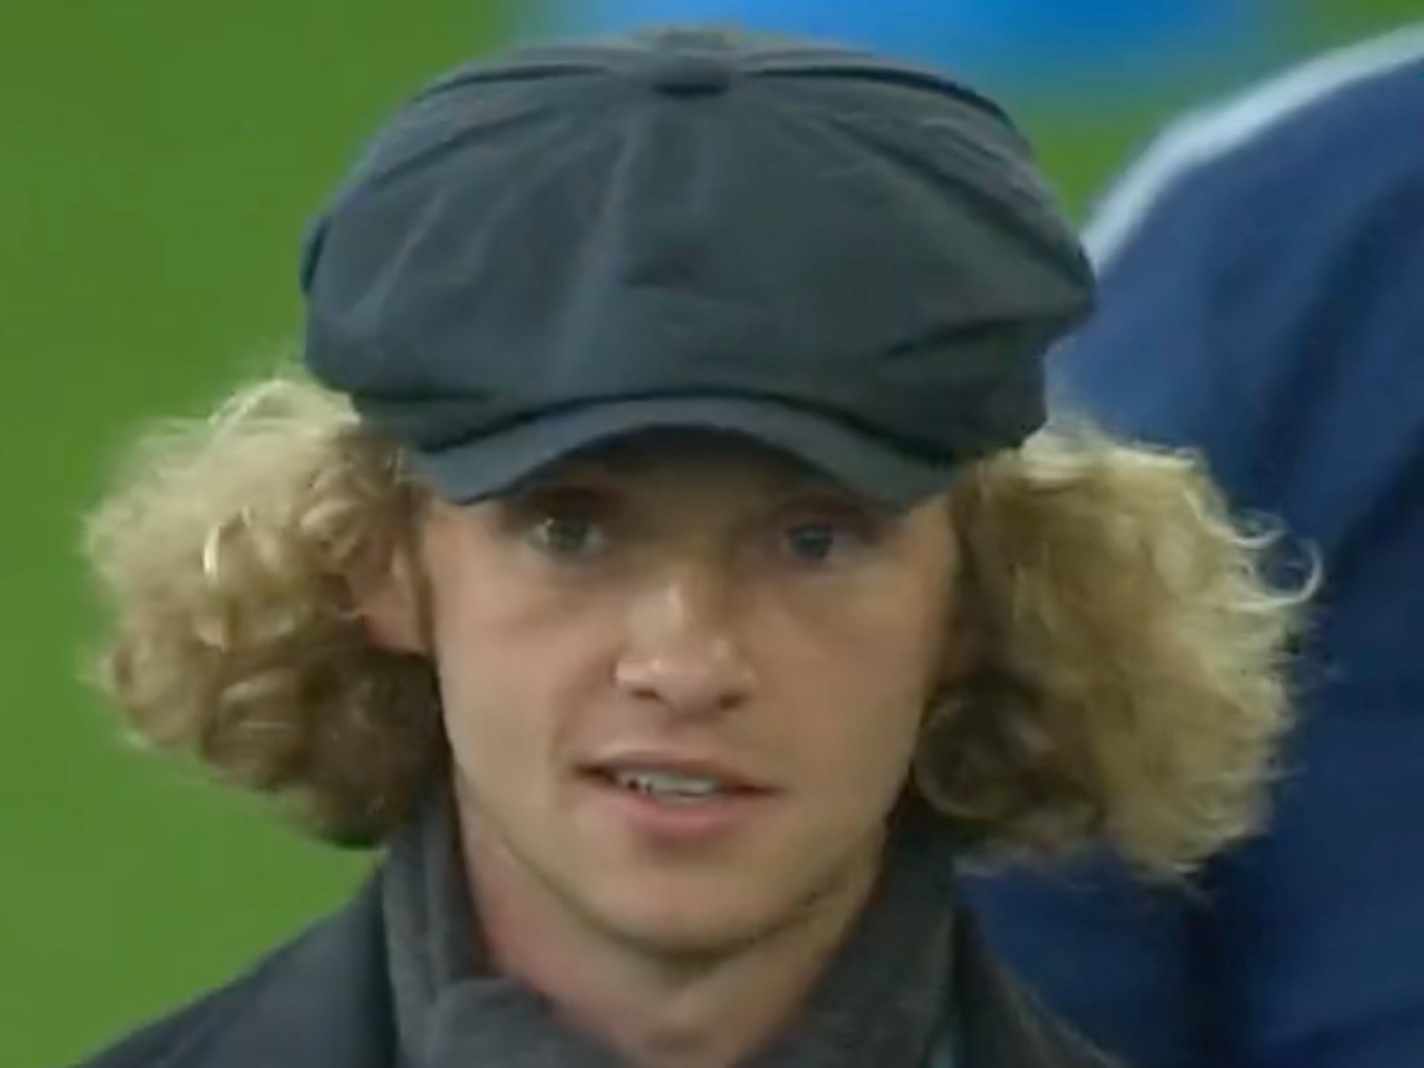 Tom Davies was present during match against Leicester